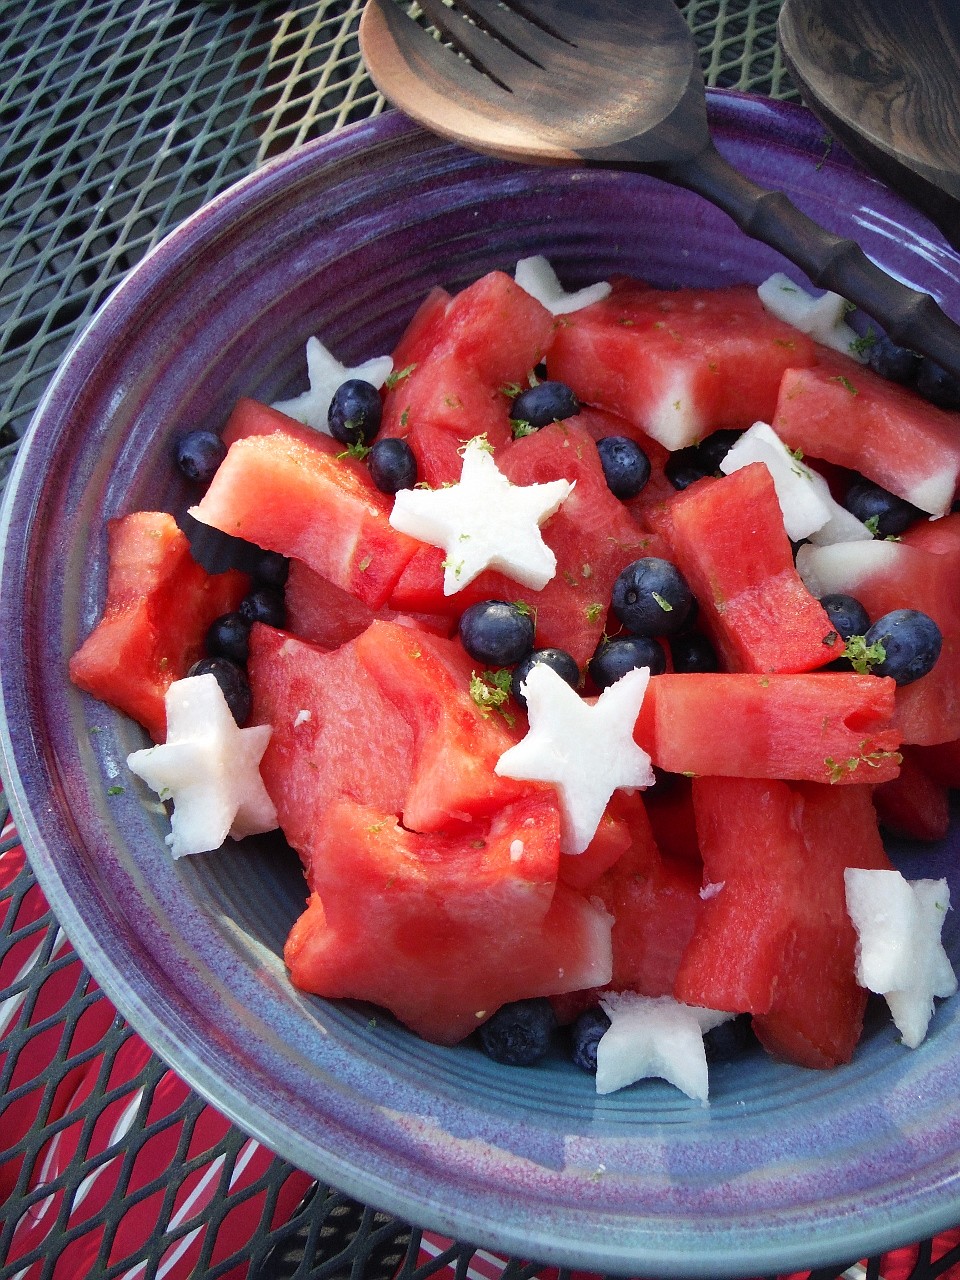 This Independence Day, celebrate with low sodium, fresh recipes, including this watermelon stars and blueberry salad.